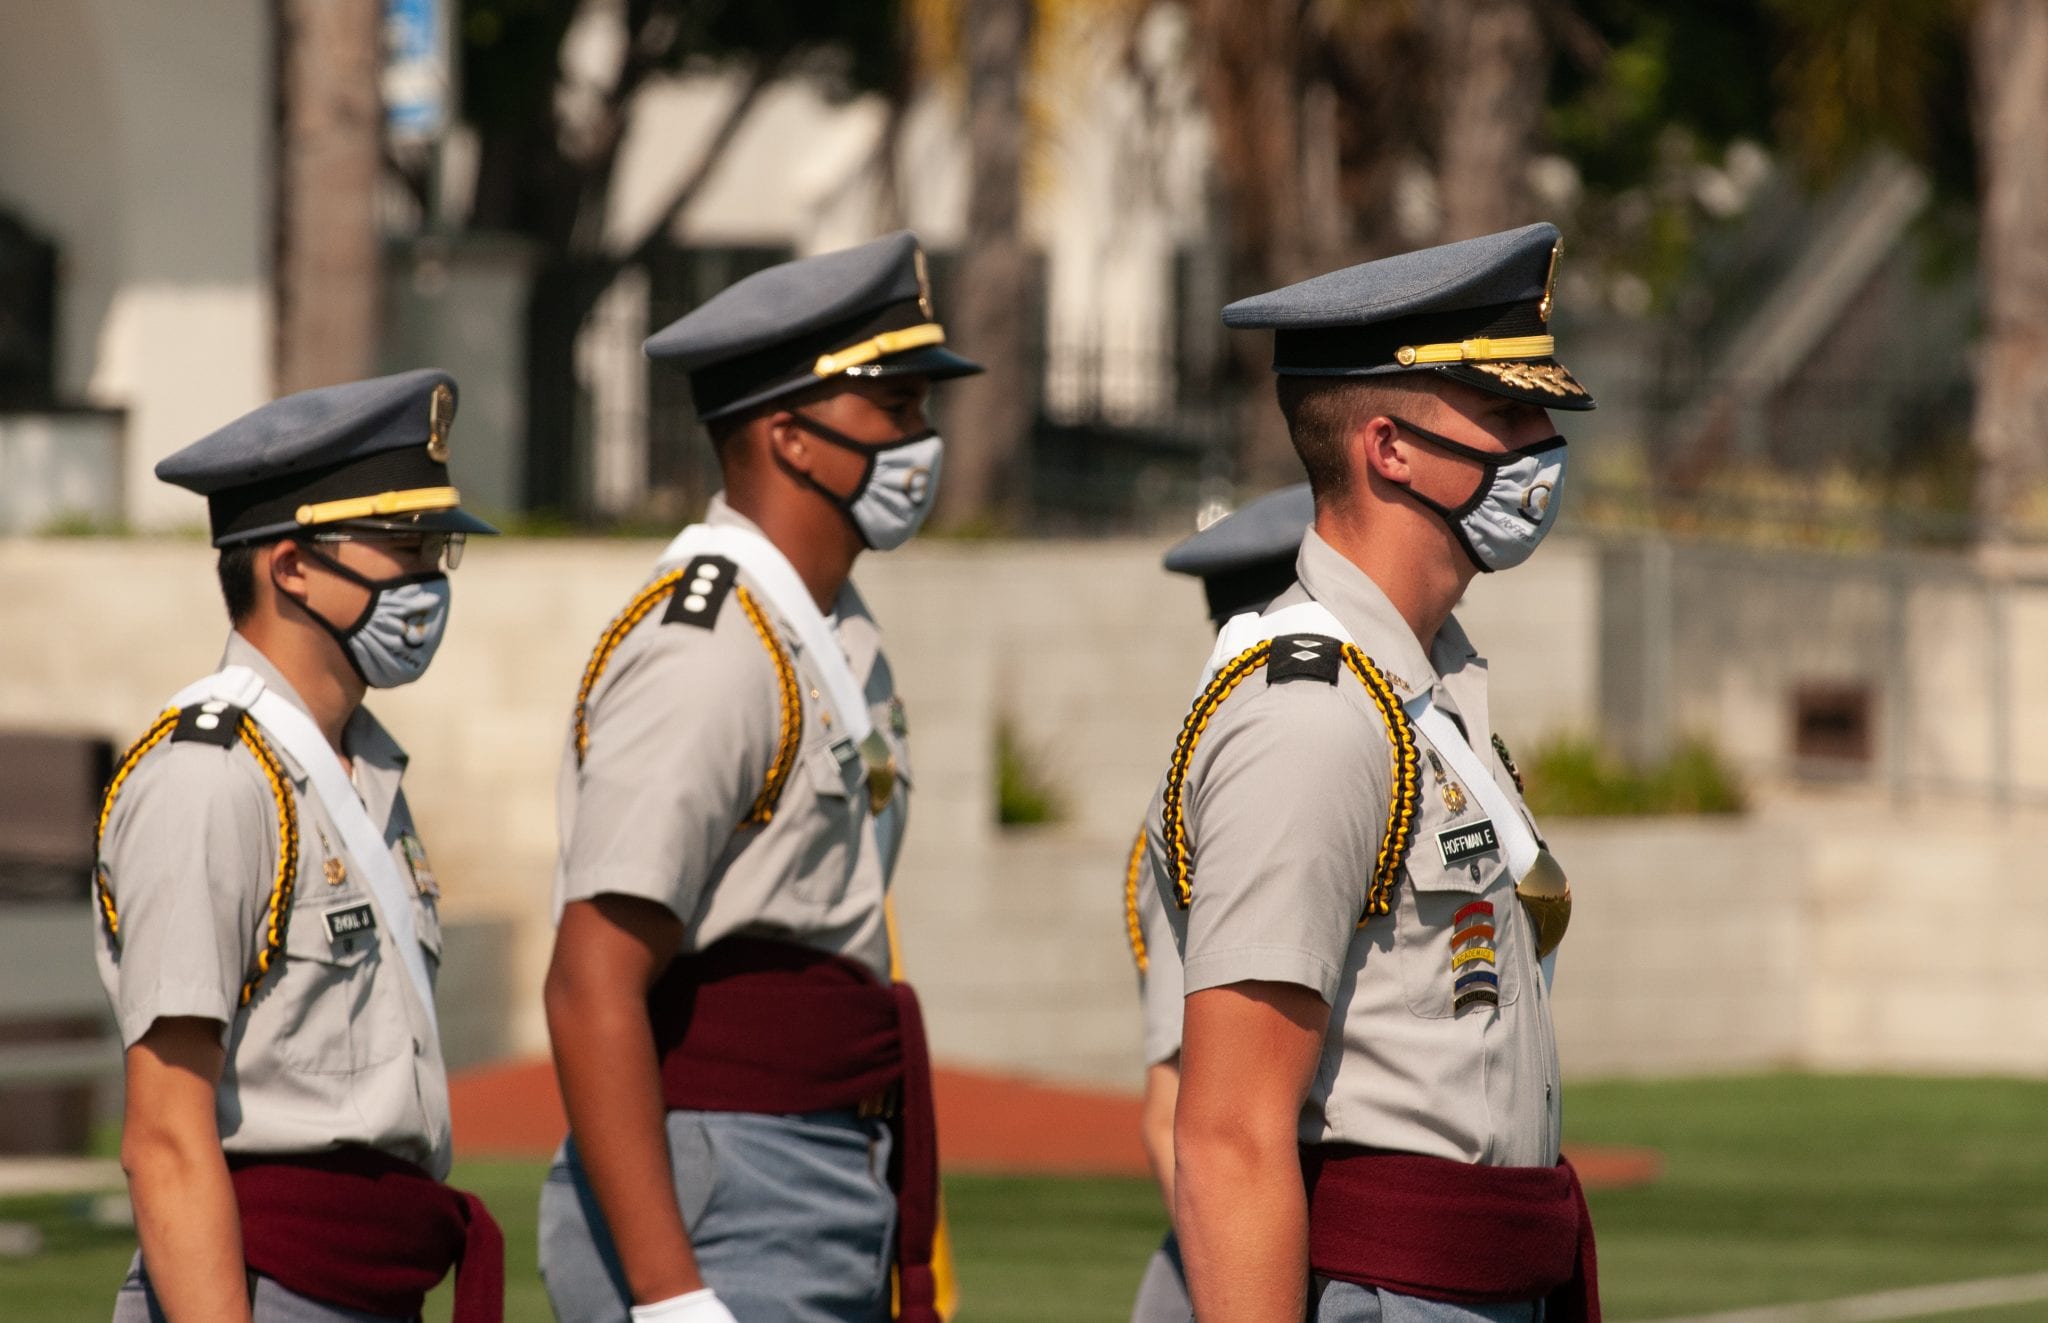 Cadets, Parents Are Thankful for What Makes ANA Different